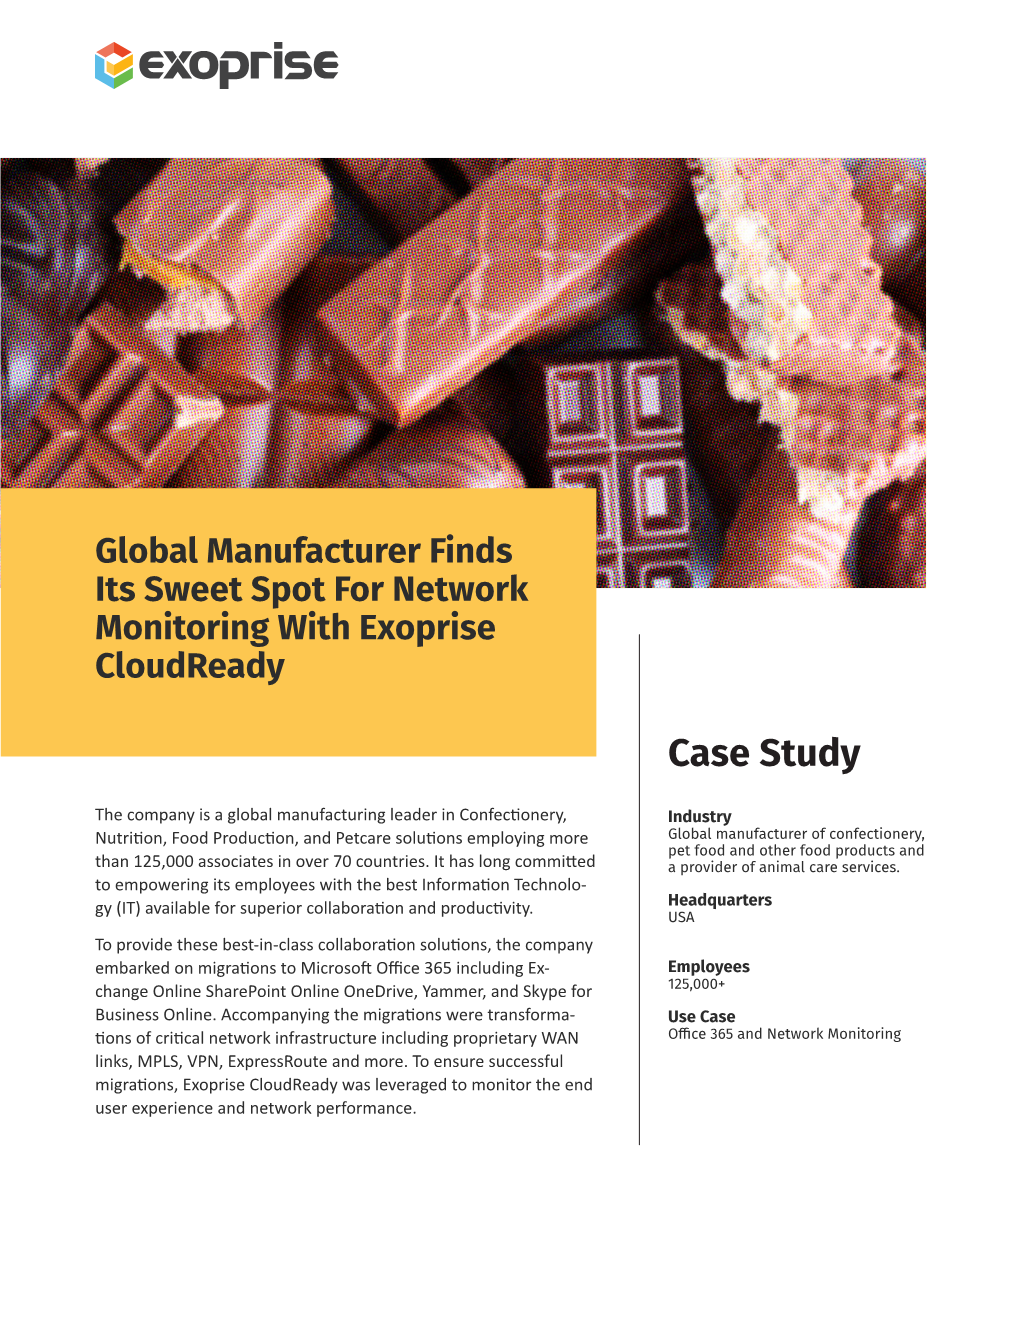 Global Manufacturer Finds Its Sweet Spot for Network Monitoring with Exoprise Cloudready